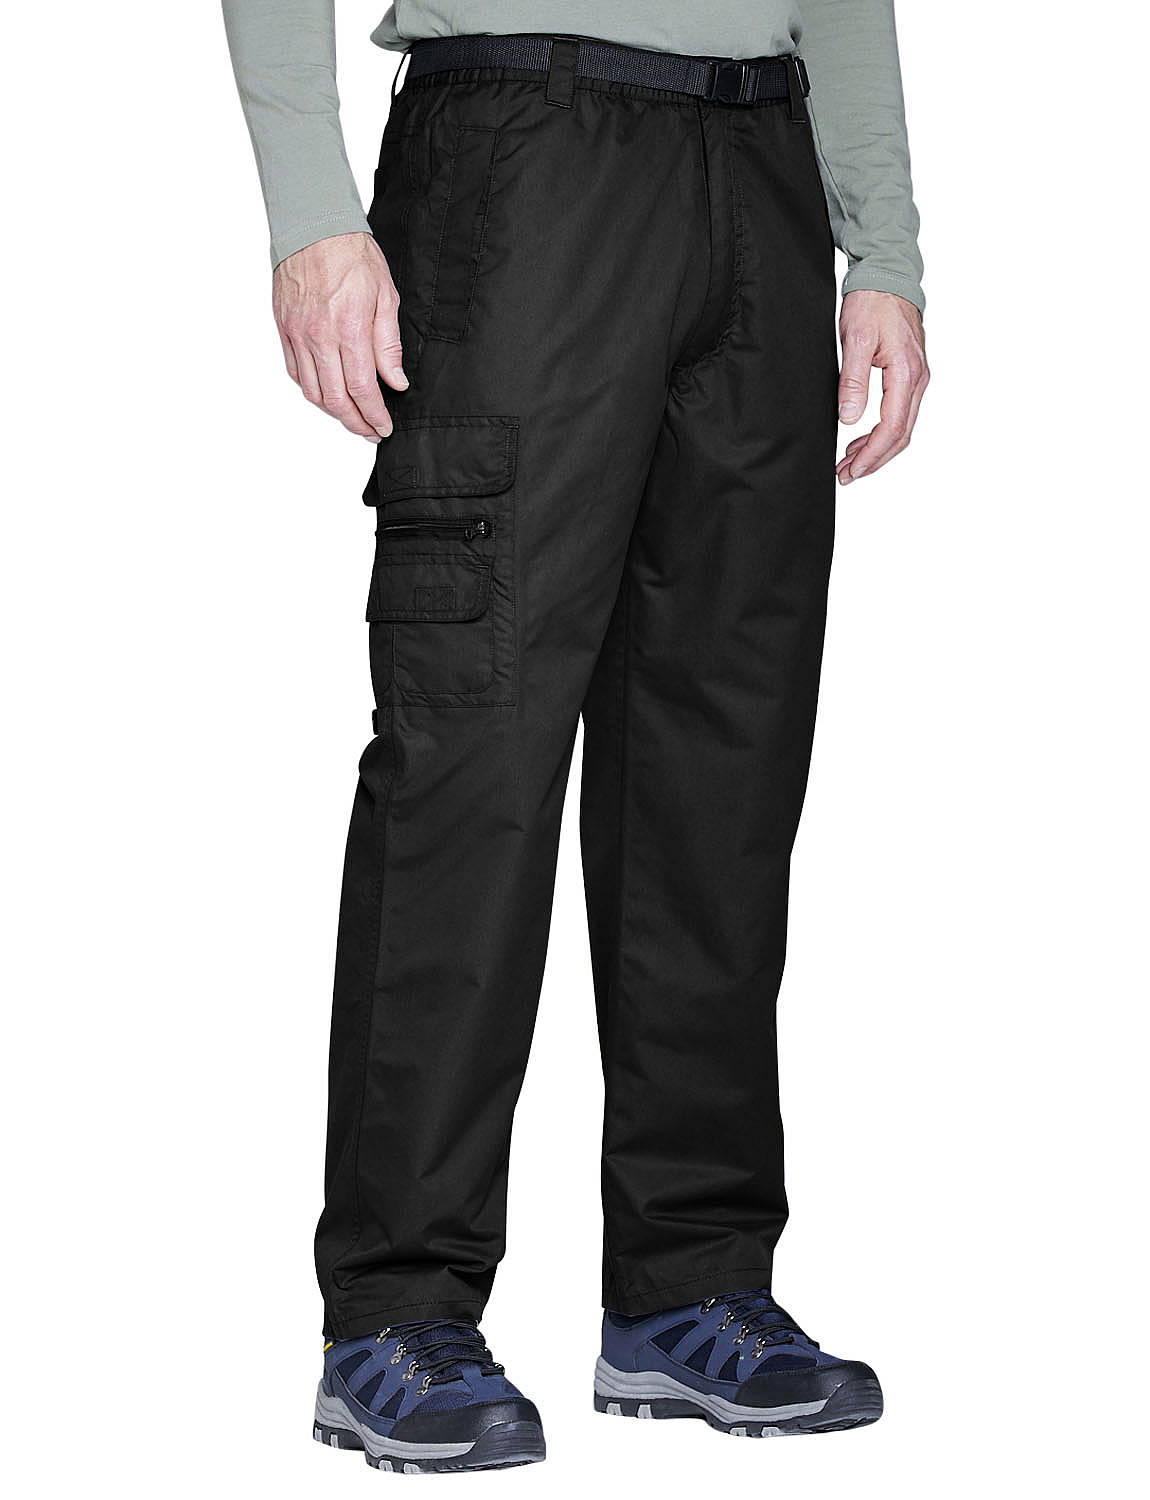 Pegasus Fleece Lined Waterproof Action Trouser with Belt | Chums